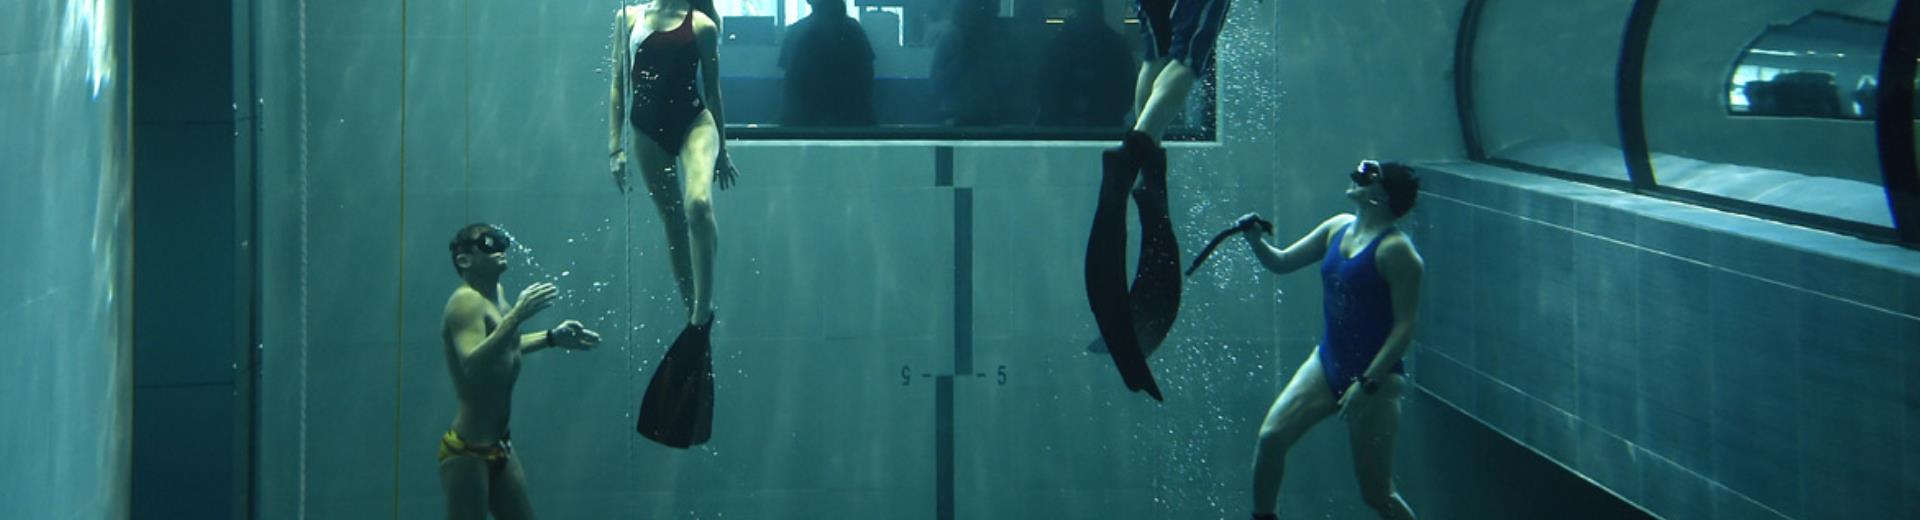 Immerse yourself in Y-40, the world''s deepest pool with BW Plus Hotel Galileo